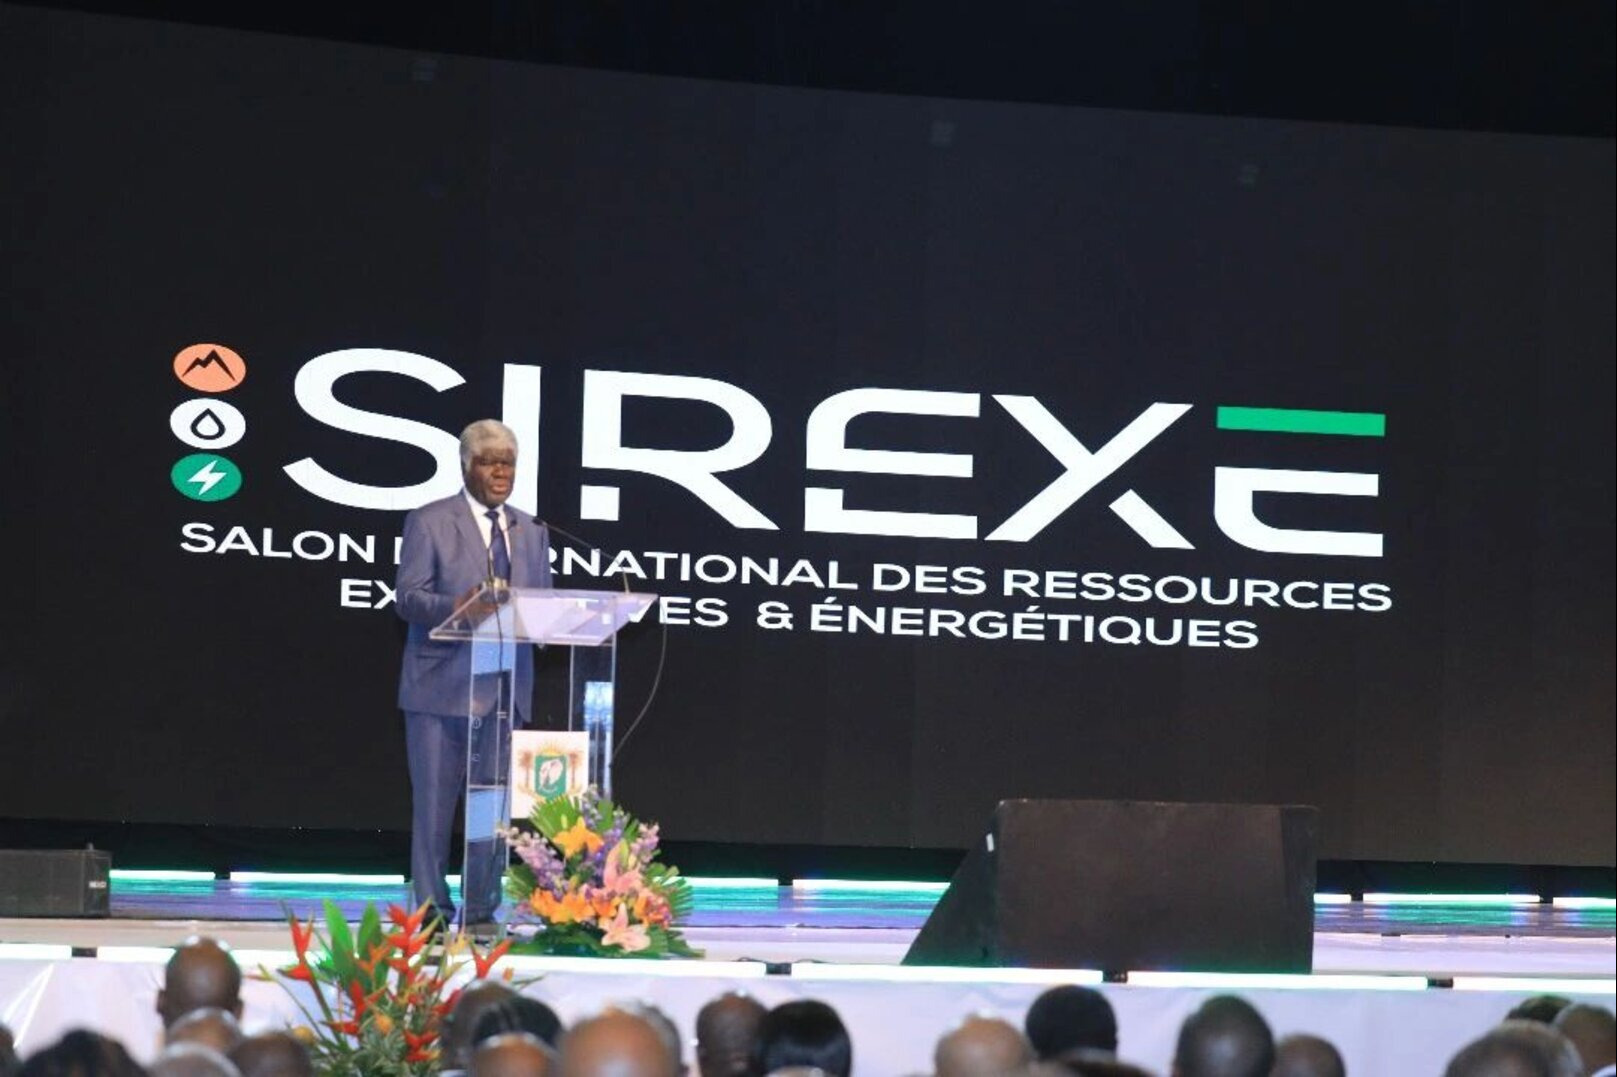 Côte d'Ivoire to Host Inaugural African Extractive and Energy Resources Summit